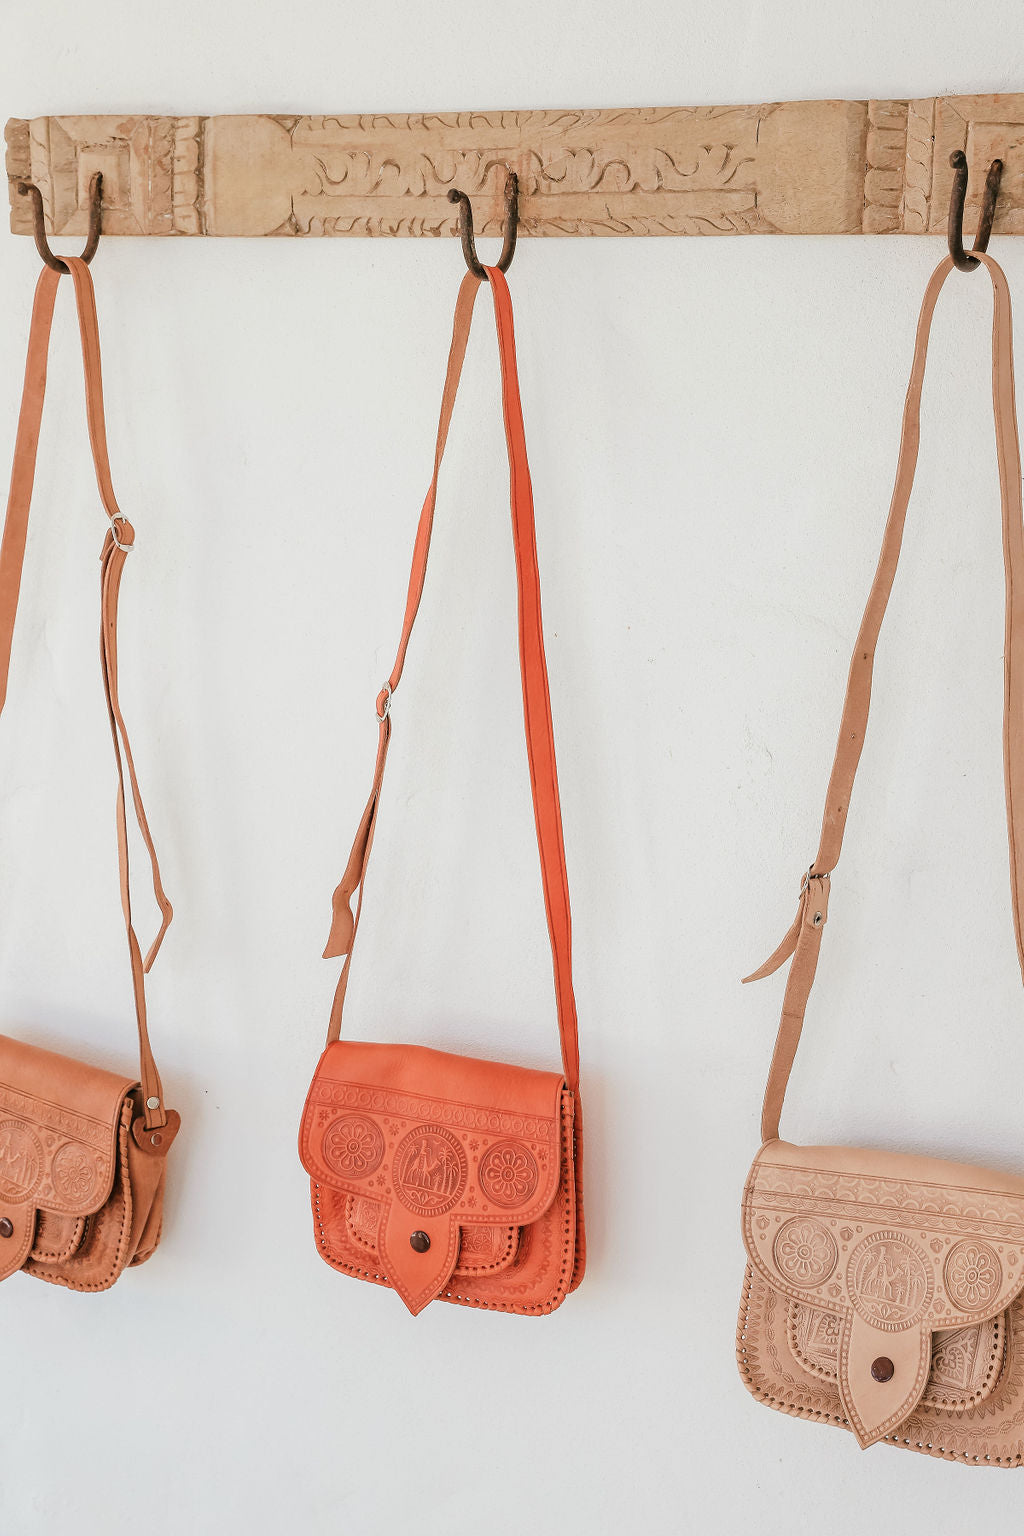 Moroccan Leather Strap Bags Tan